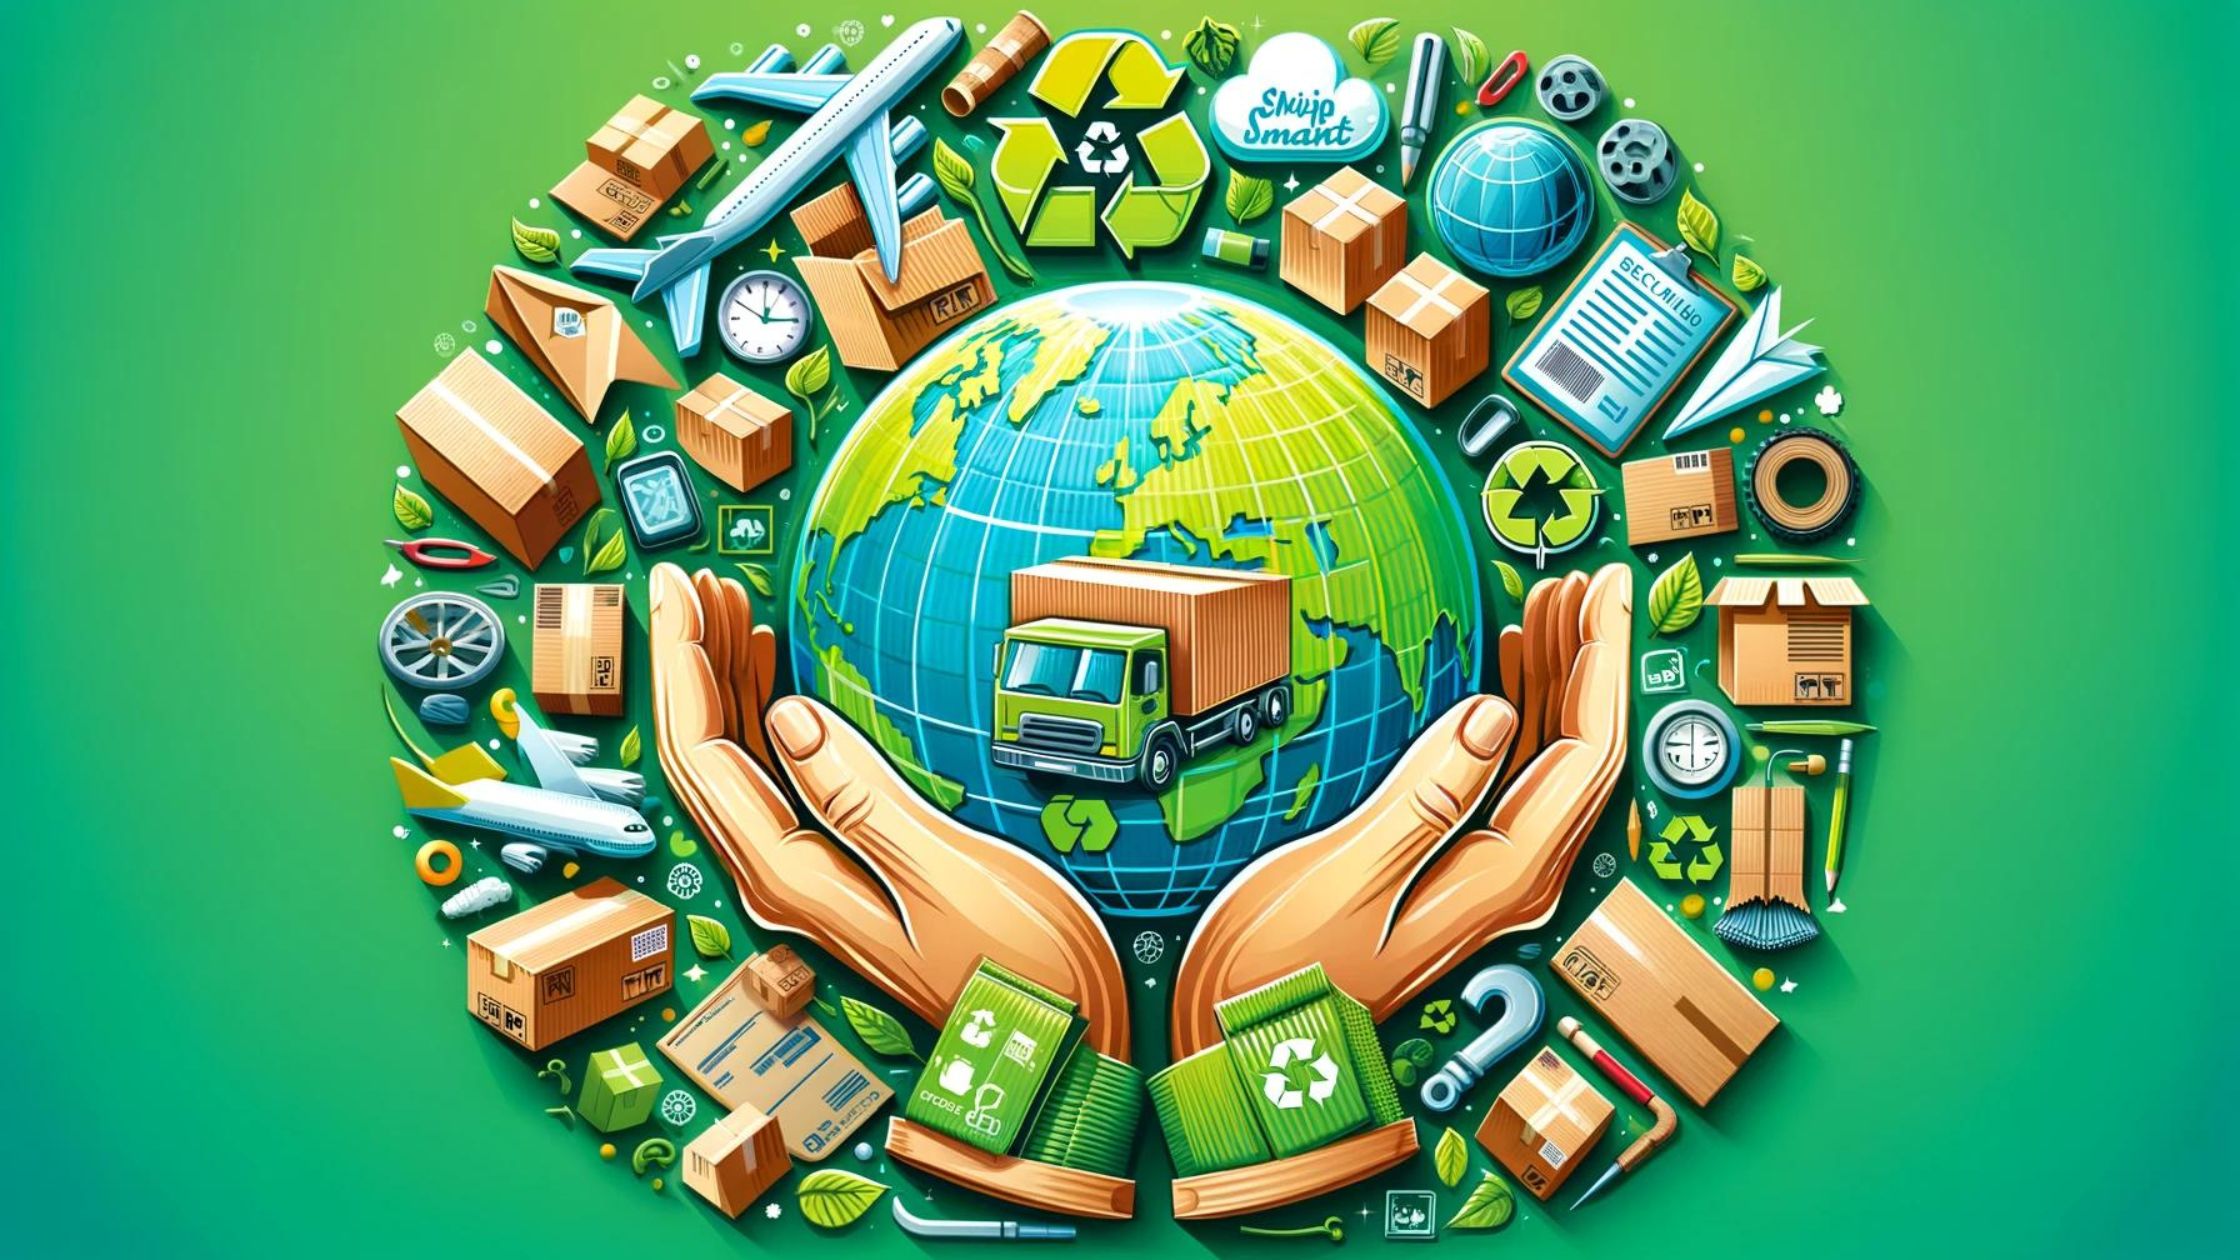 10 Best Practices For Eco-Friendly Shipping: A Casual Guide for Online Retailers and Logistics Companies